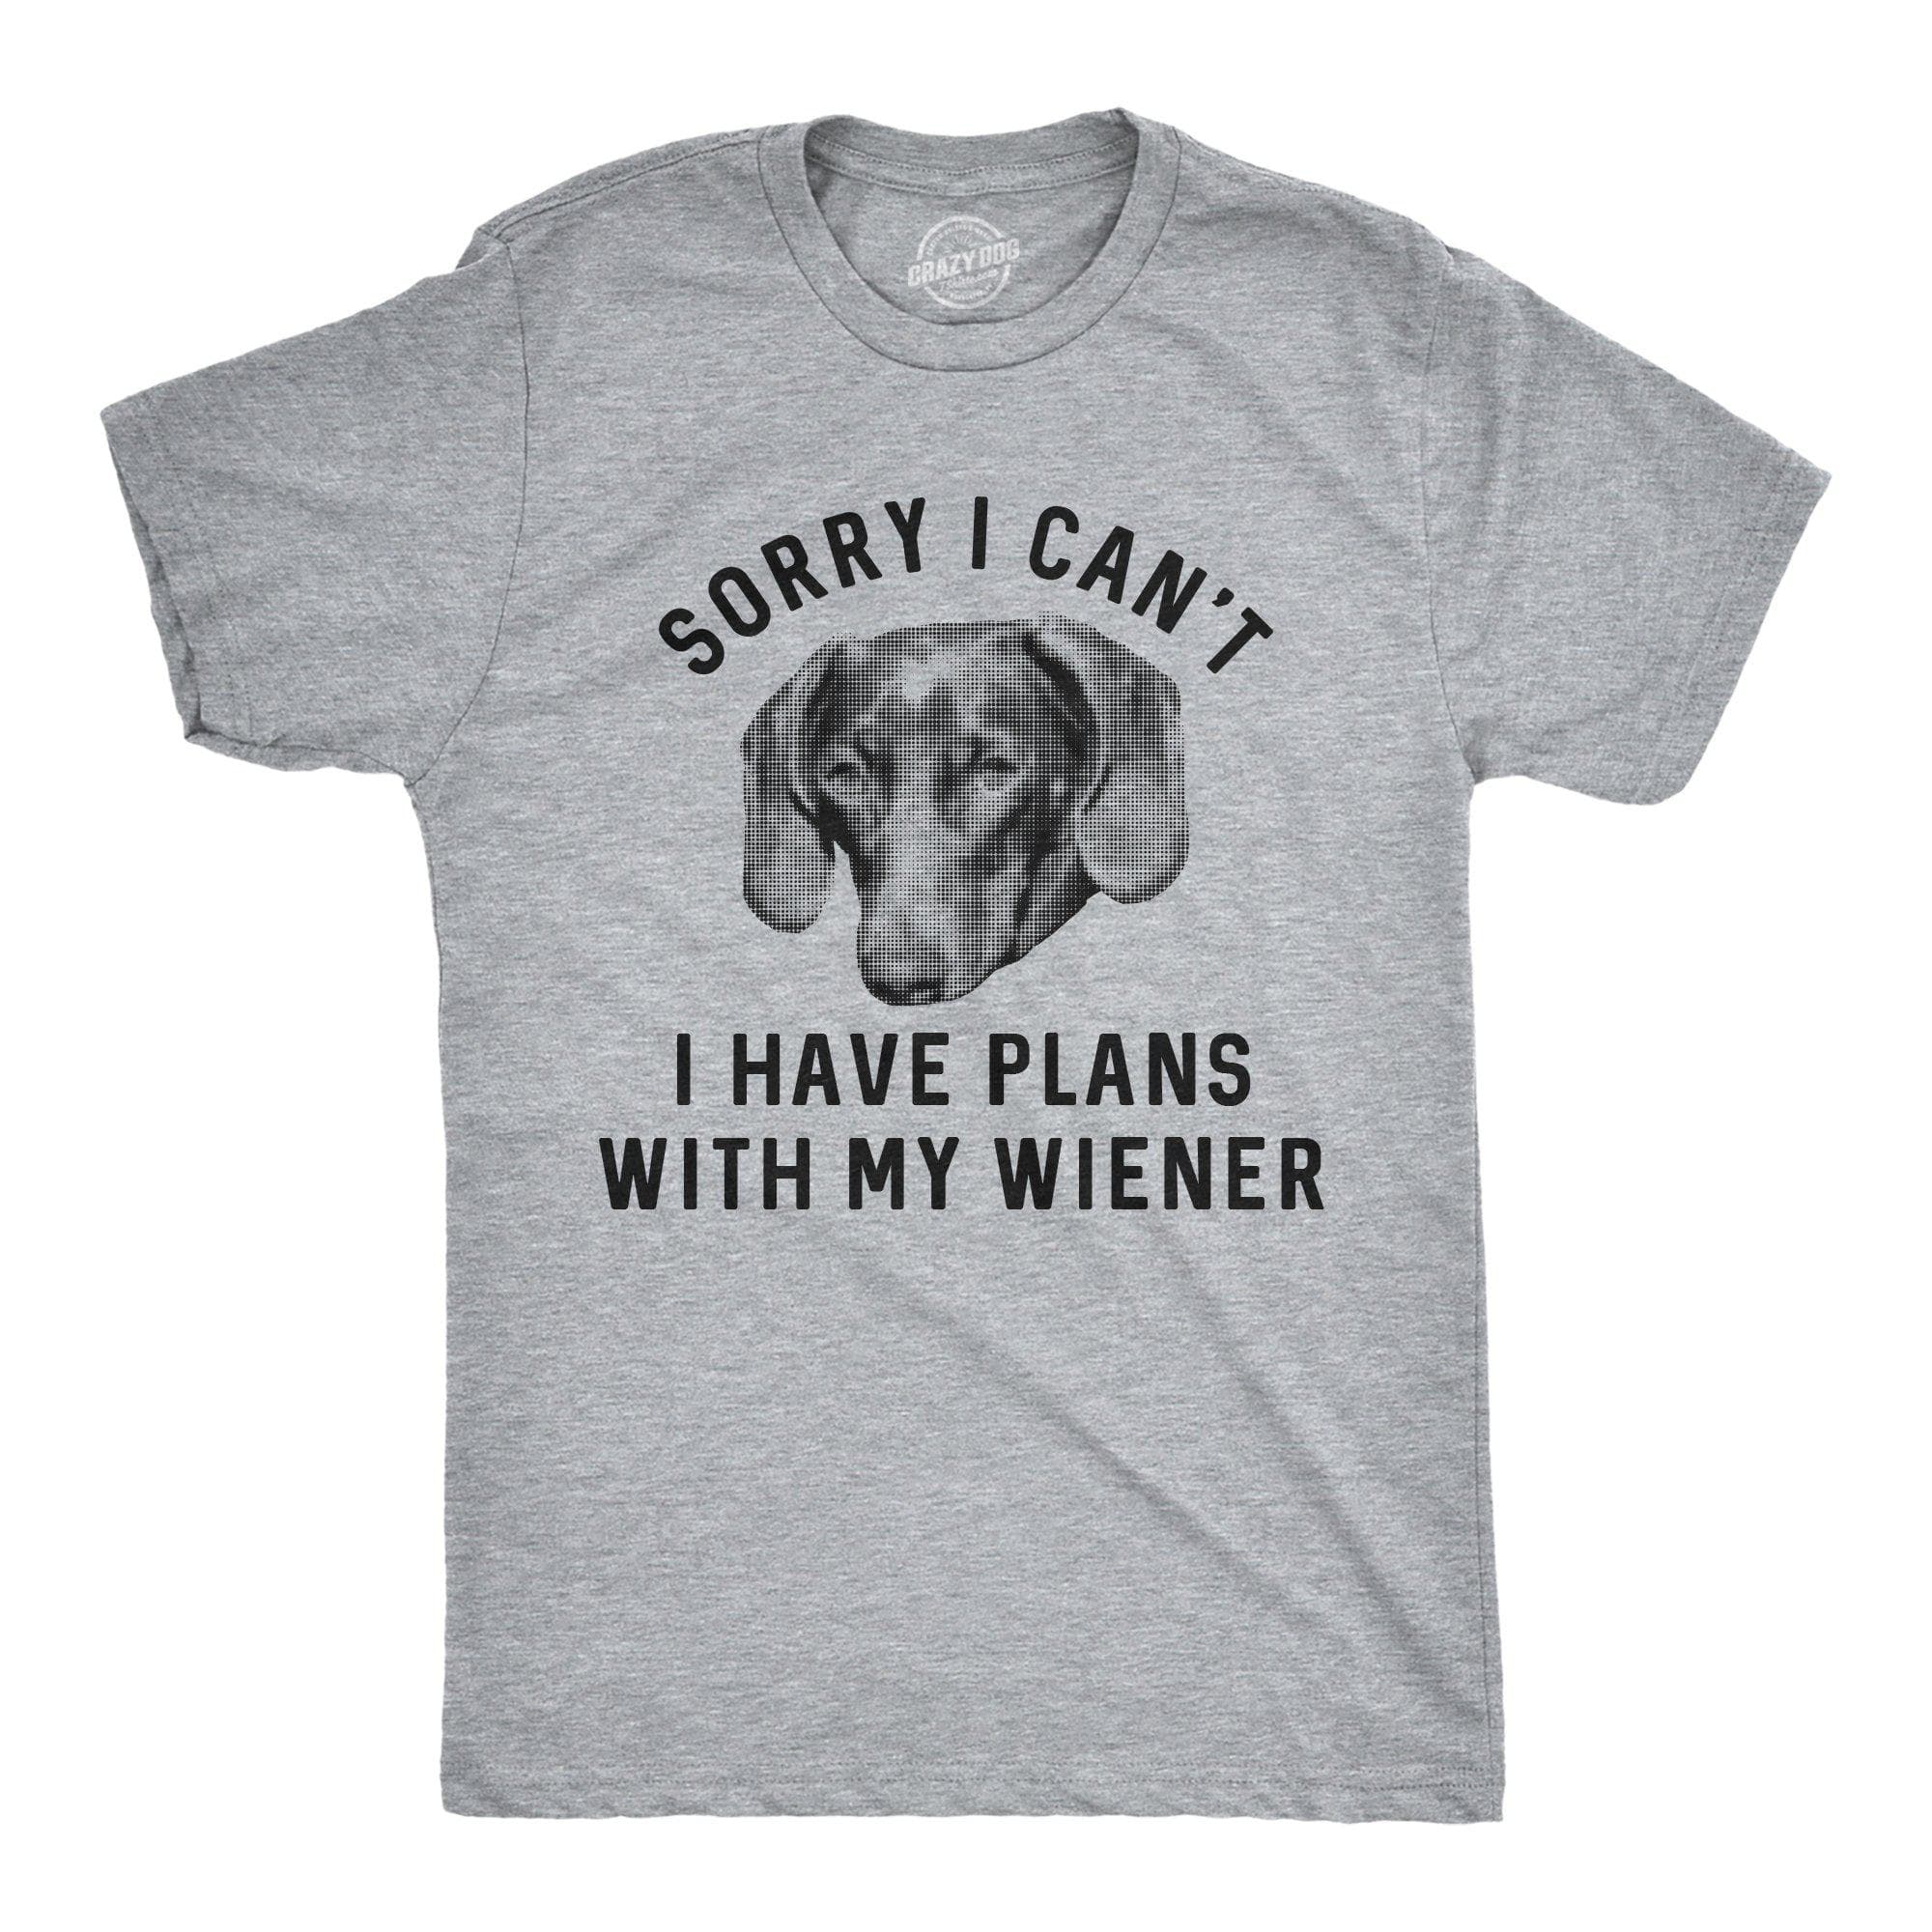 Sorry I Can't I Have Plans With My Wiener Men's Tshirt - Crazy Dog T-Shirts